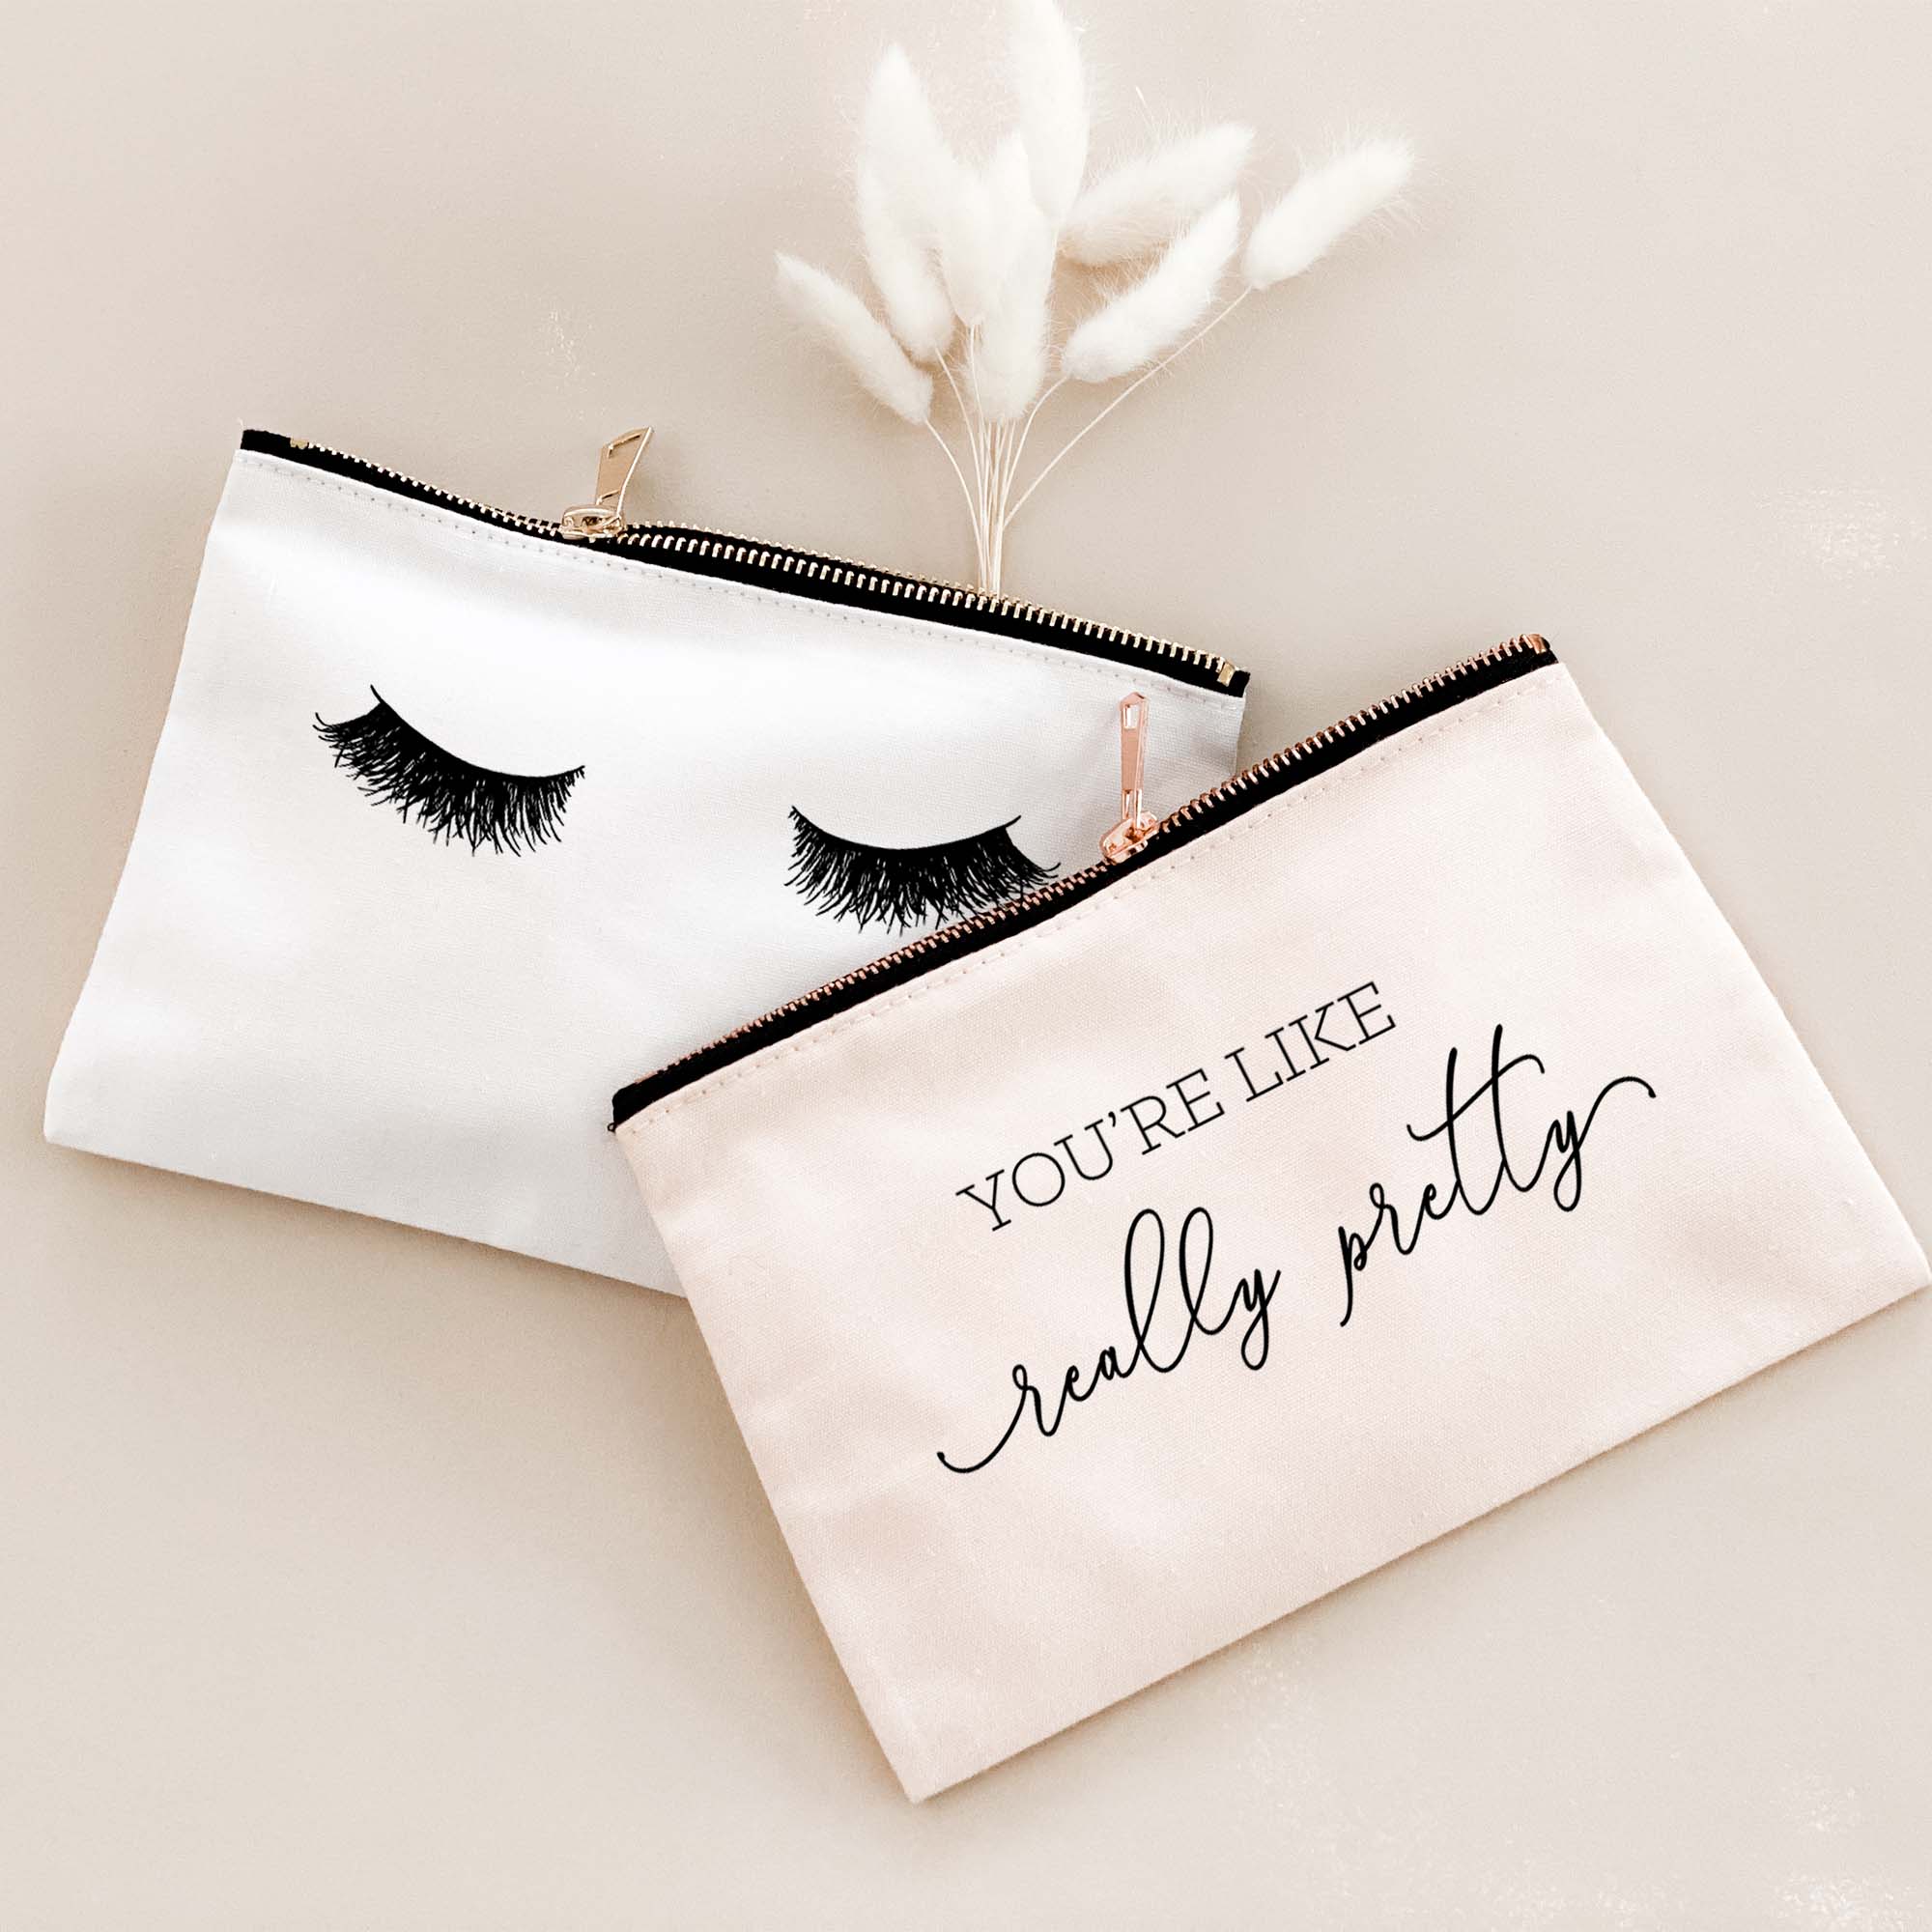 Custom Makeup Bag Personalized Mothers Day Gifts Best -   Bridesmaid  makeup bag gift, Custom makeup bags, Bridesmaid gift makeup